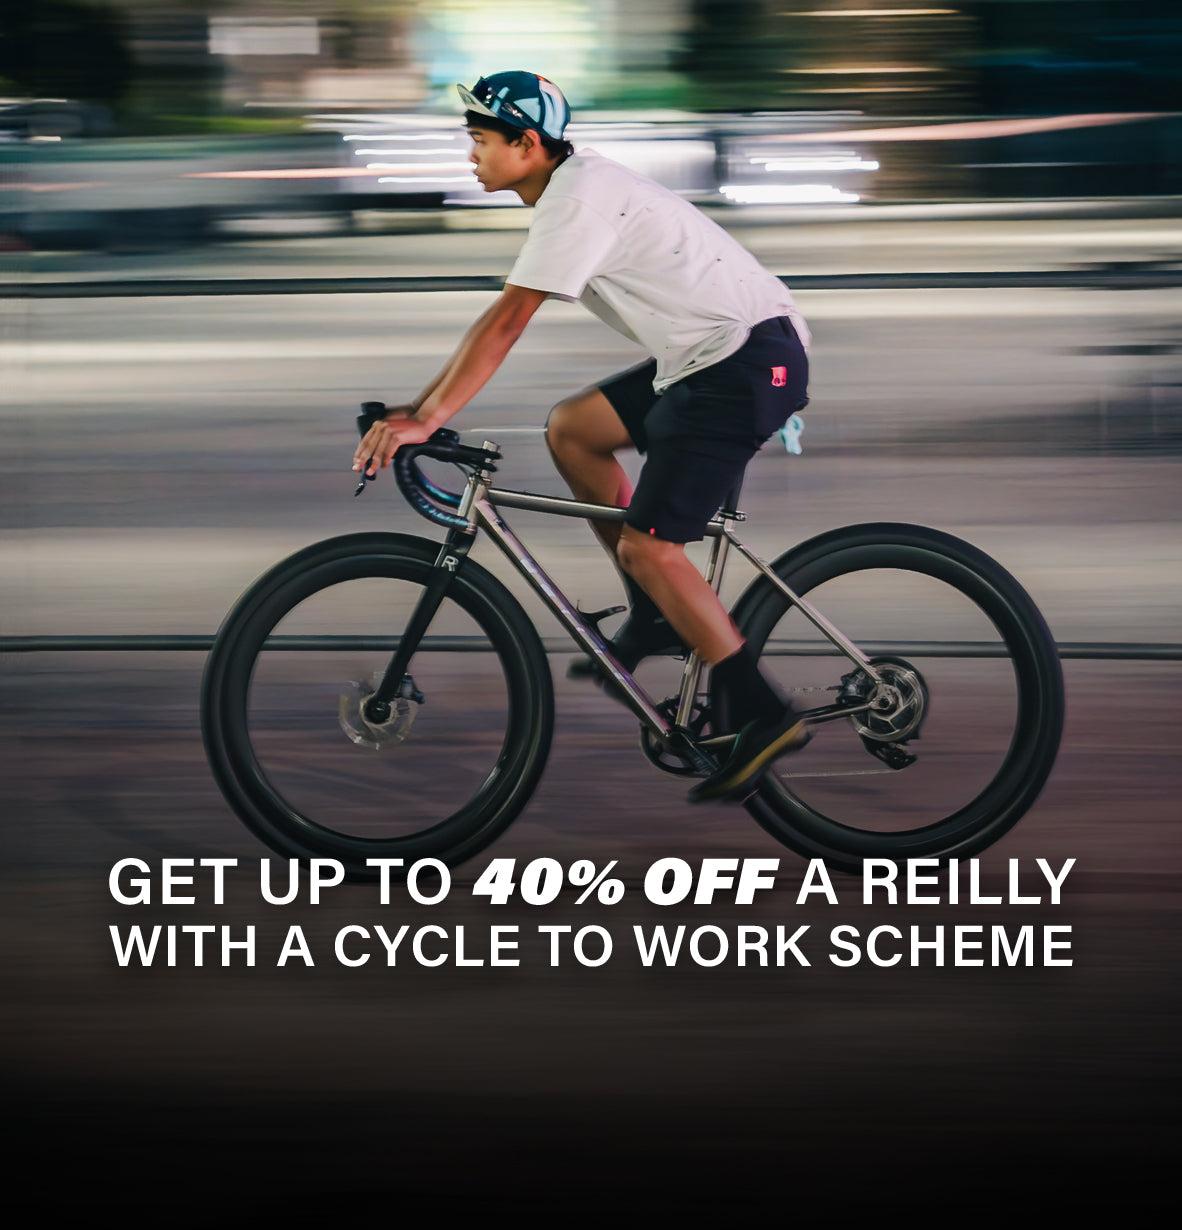 Man in Tshirt and shorts on a titanium bike.  Urban background is blurred. Wording is Get 40% off a Reilly with a Cycle to work Scheme.  